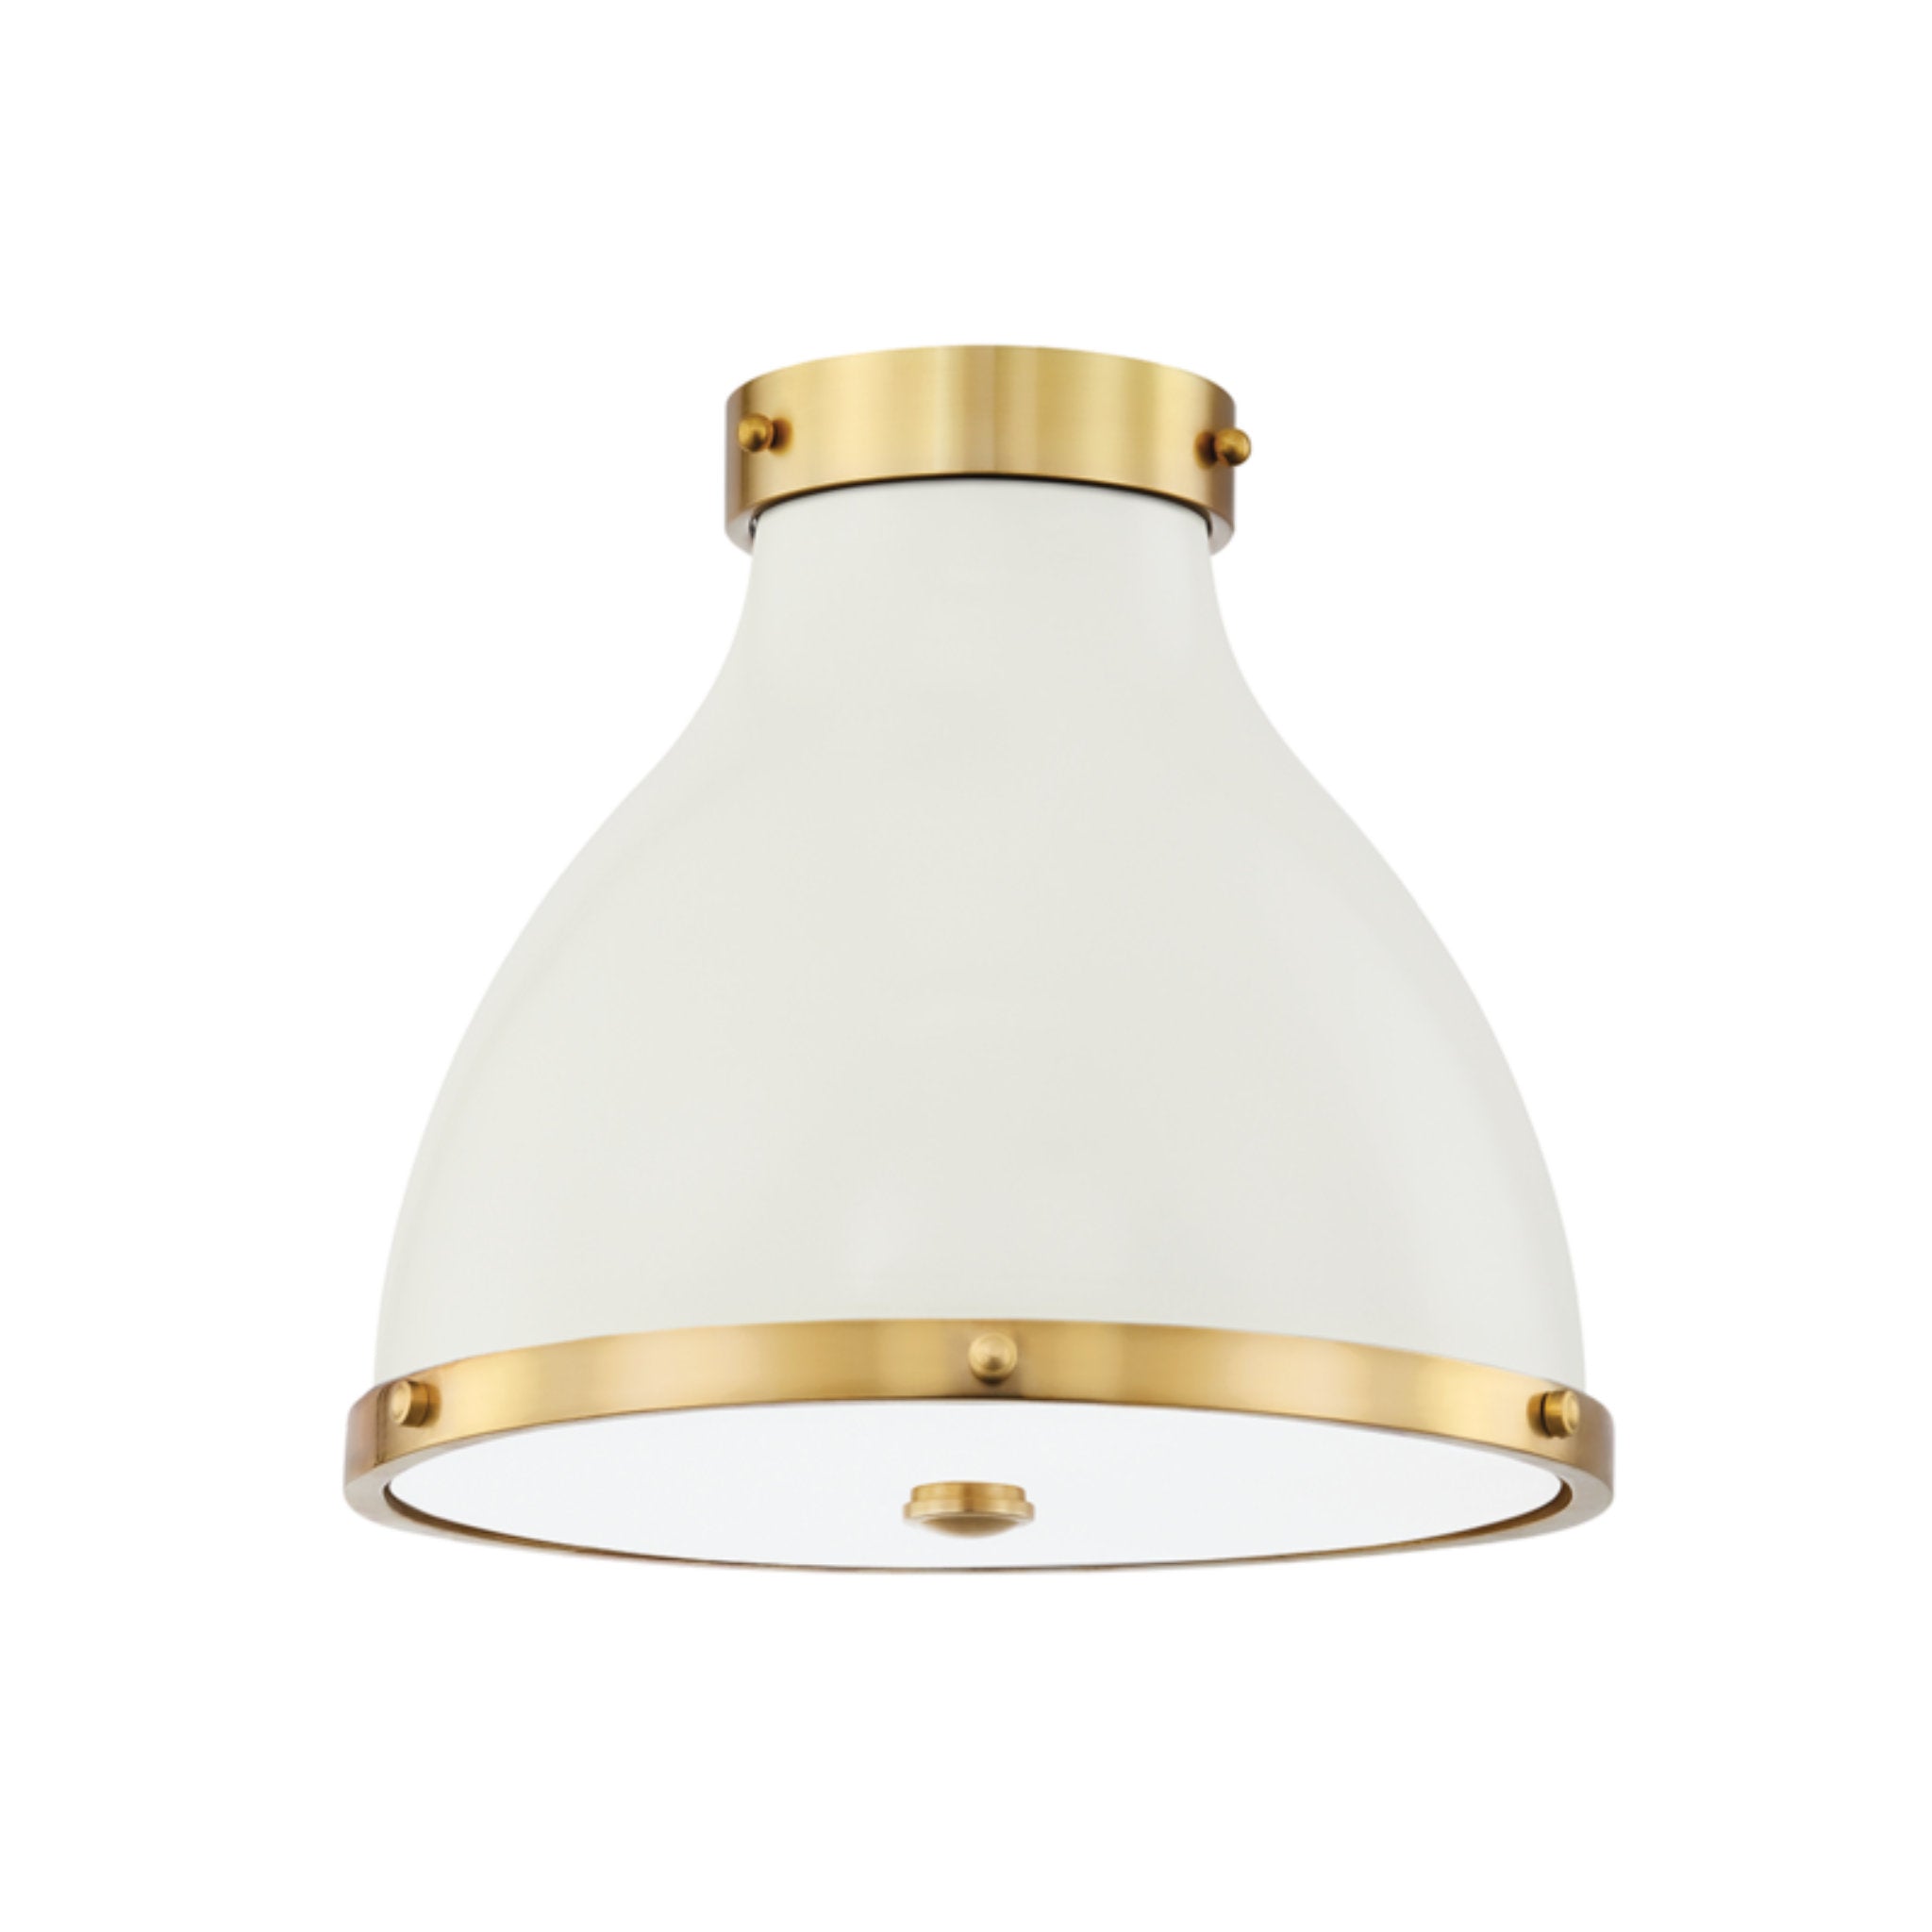 Painted No. 3 2 Light Flush Mount in Aged Brass/off White by Mark D. Sikes